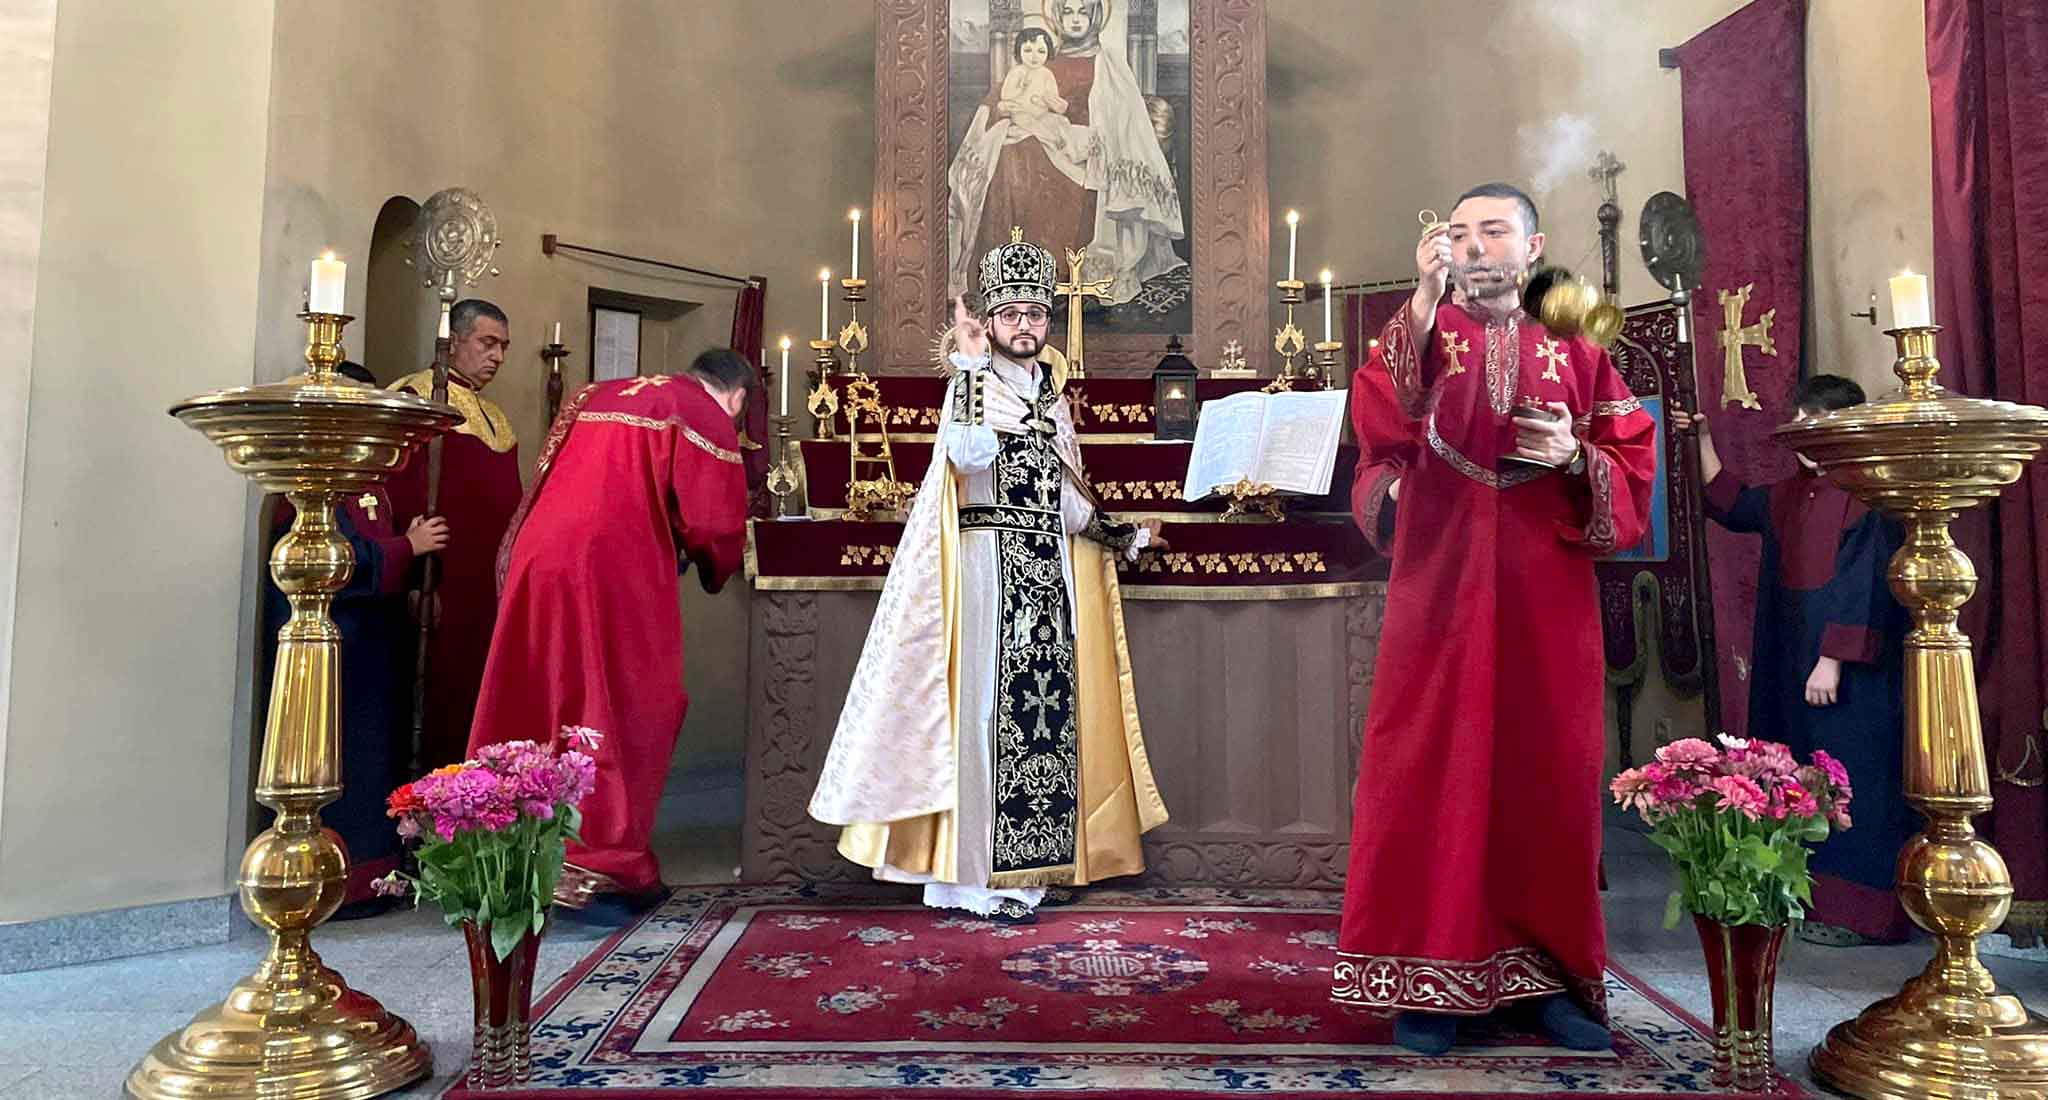 The Feast of Holy Etchmiadzin was celebrated in Tbilisi with Divine Liturgy and Armenian gata